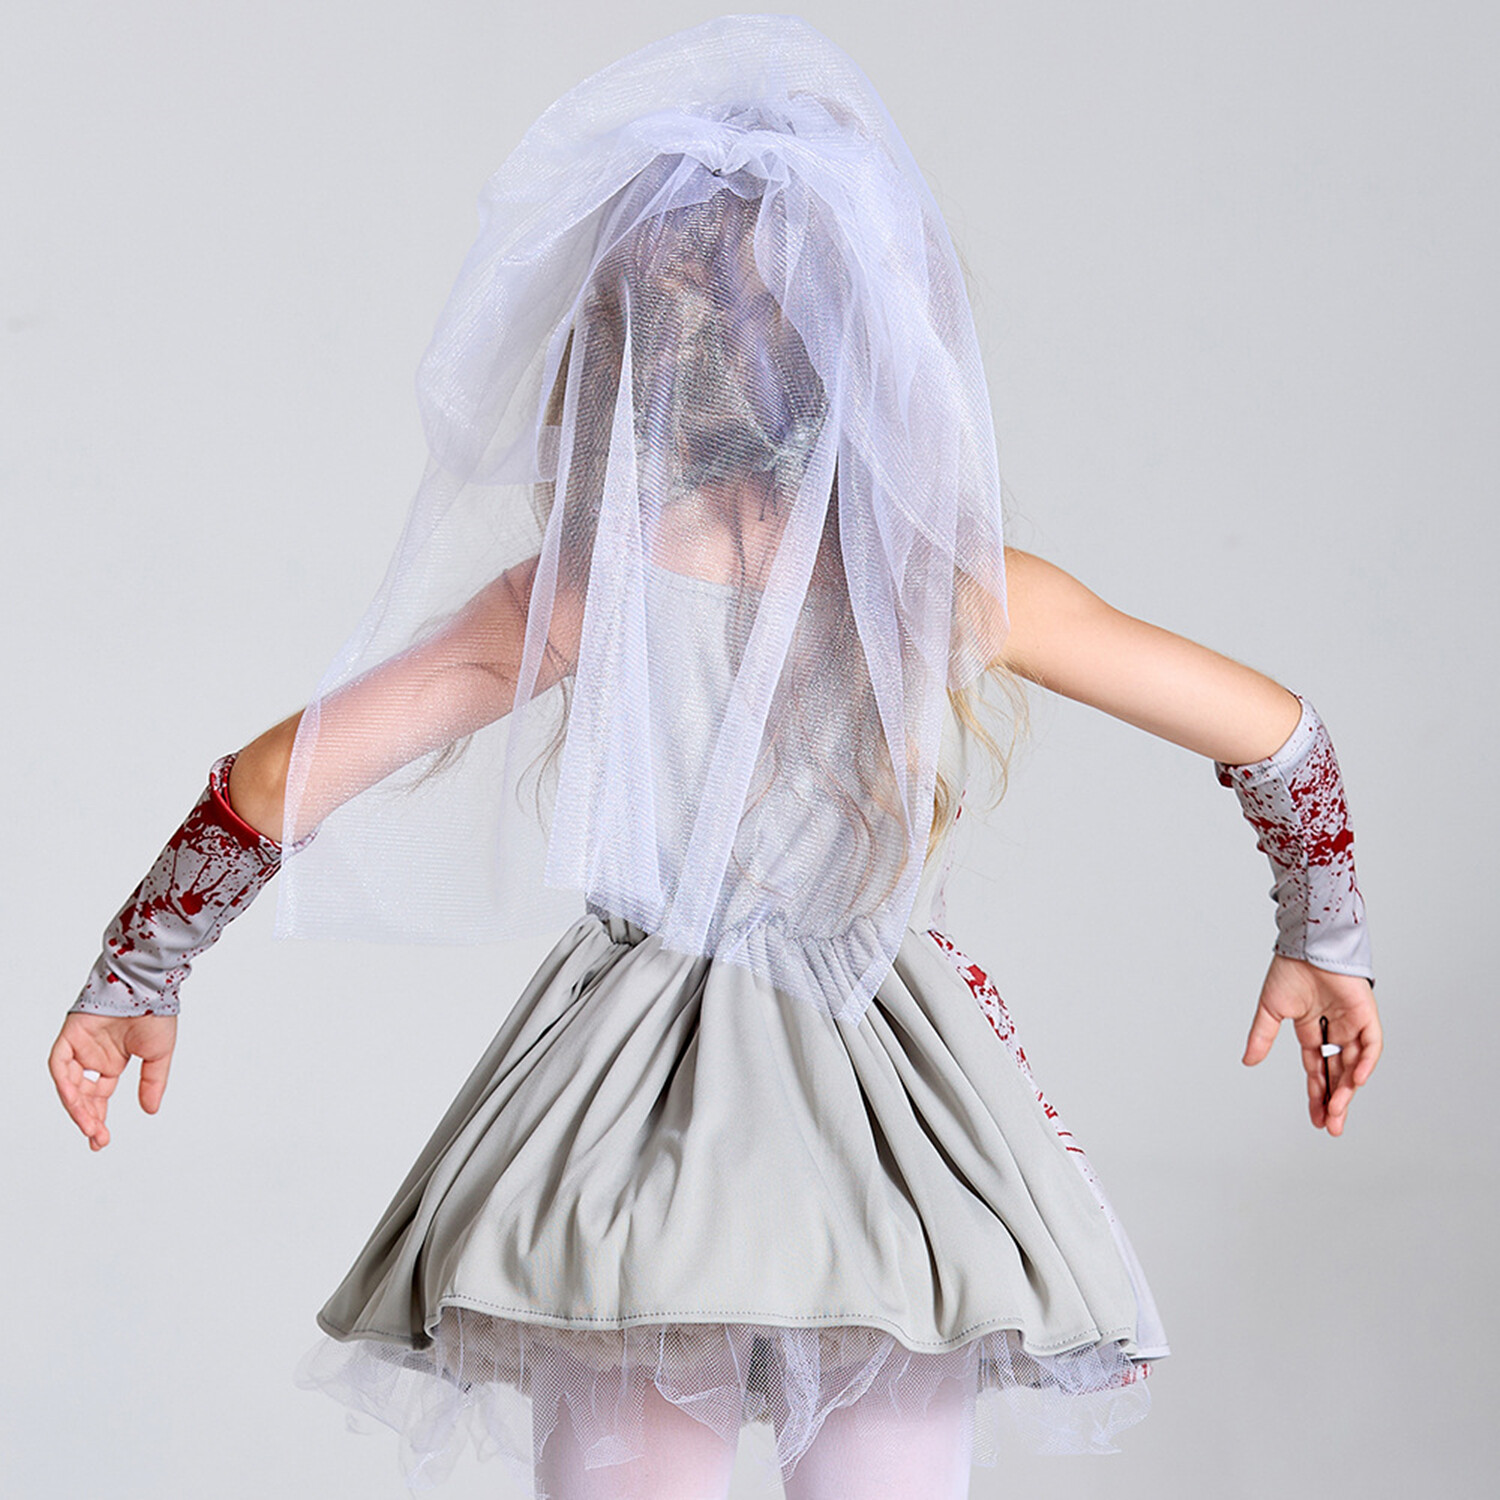 Phenas Girls Scary Bloody Ghost Bride Halloween Costume Horror Ghost Cosplay Dress-up - image 4 of 7